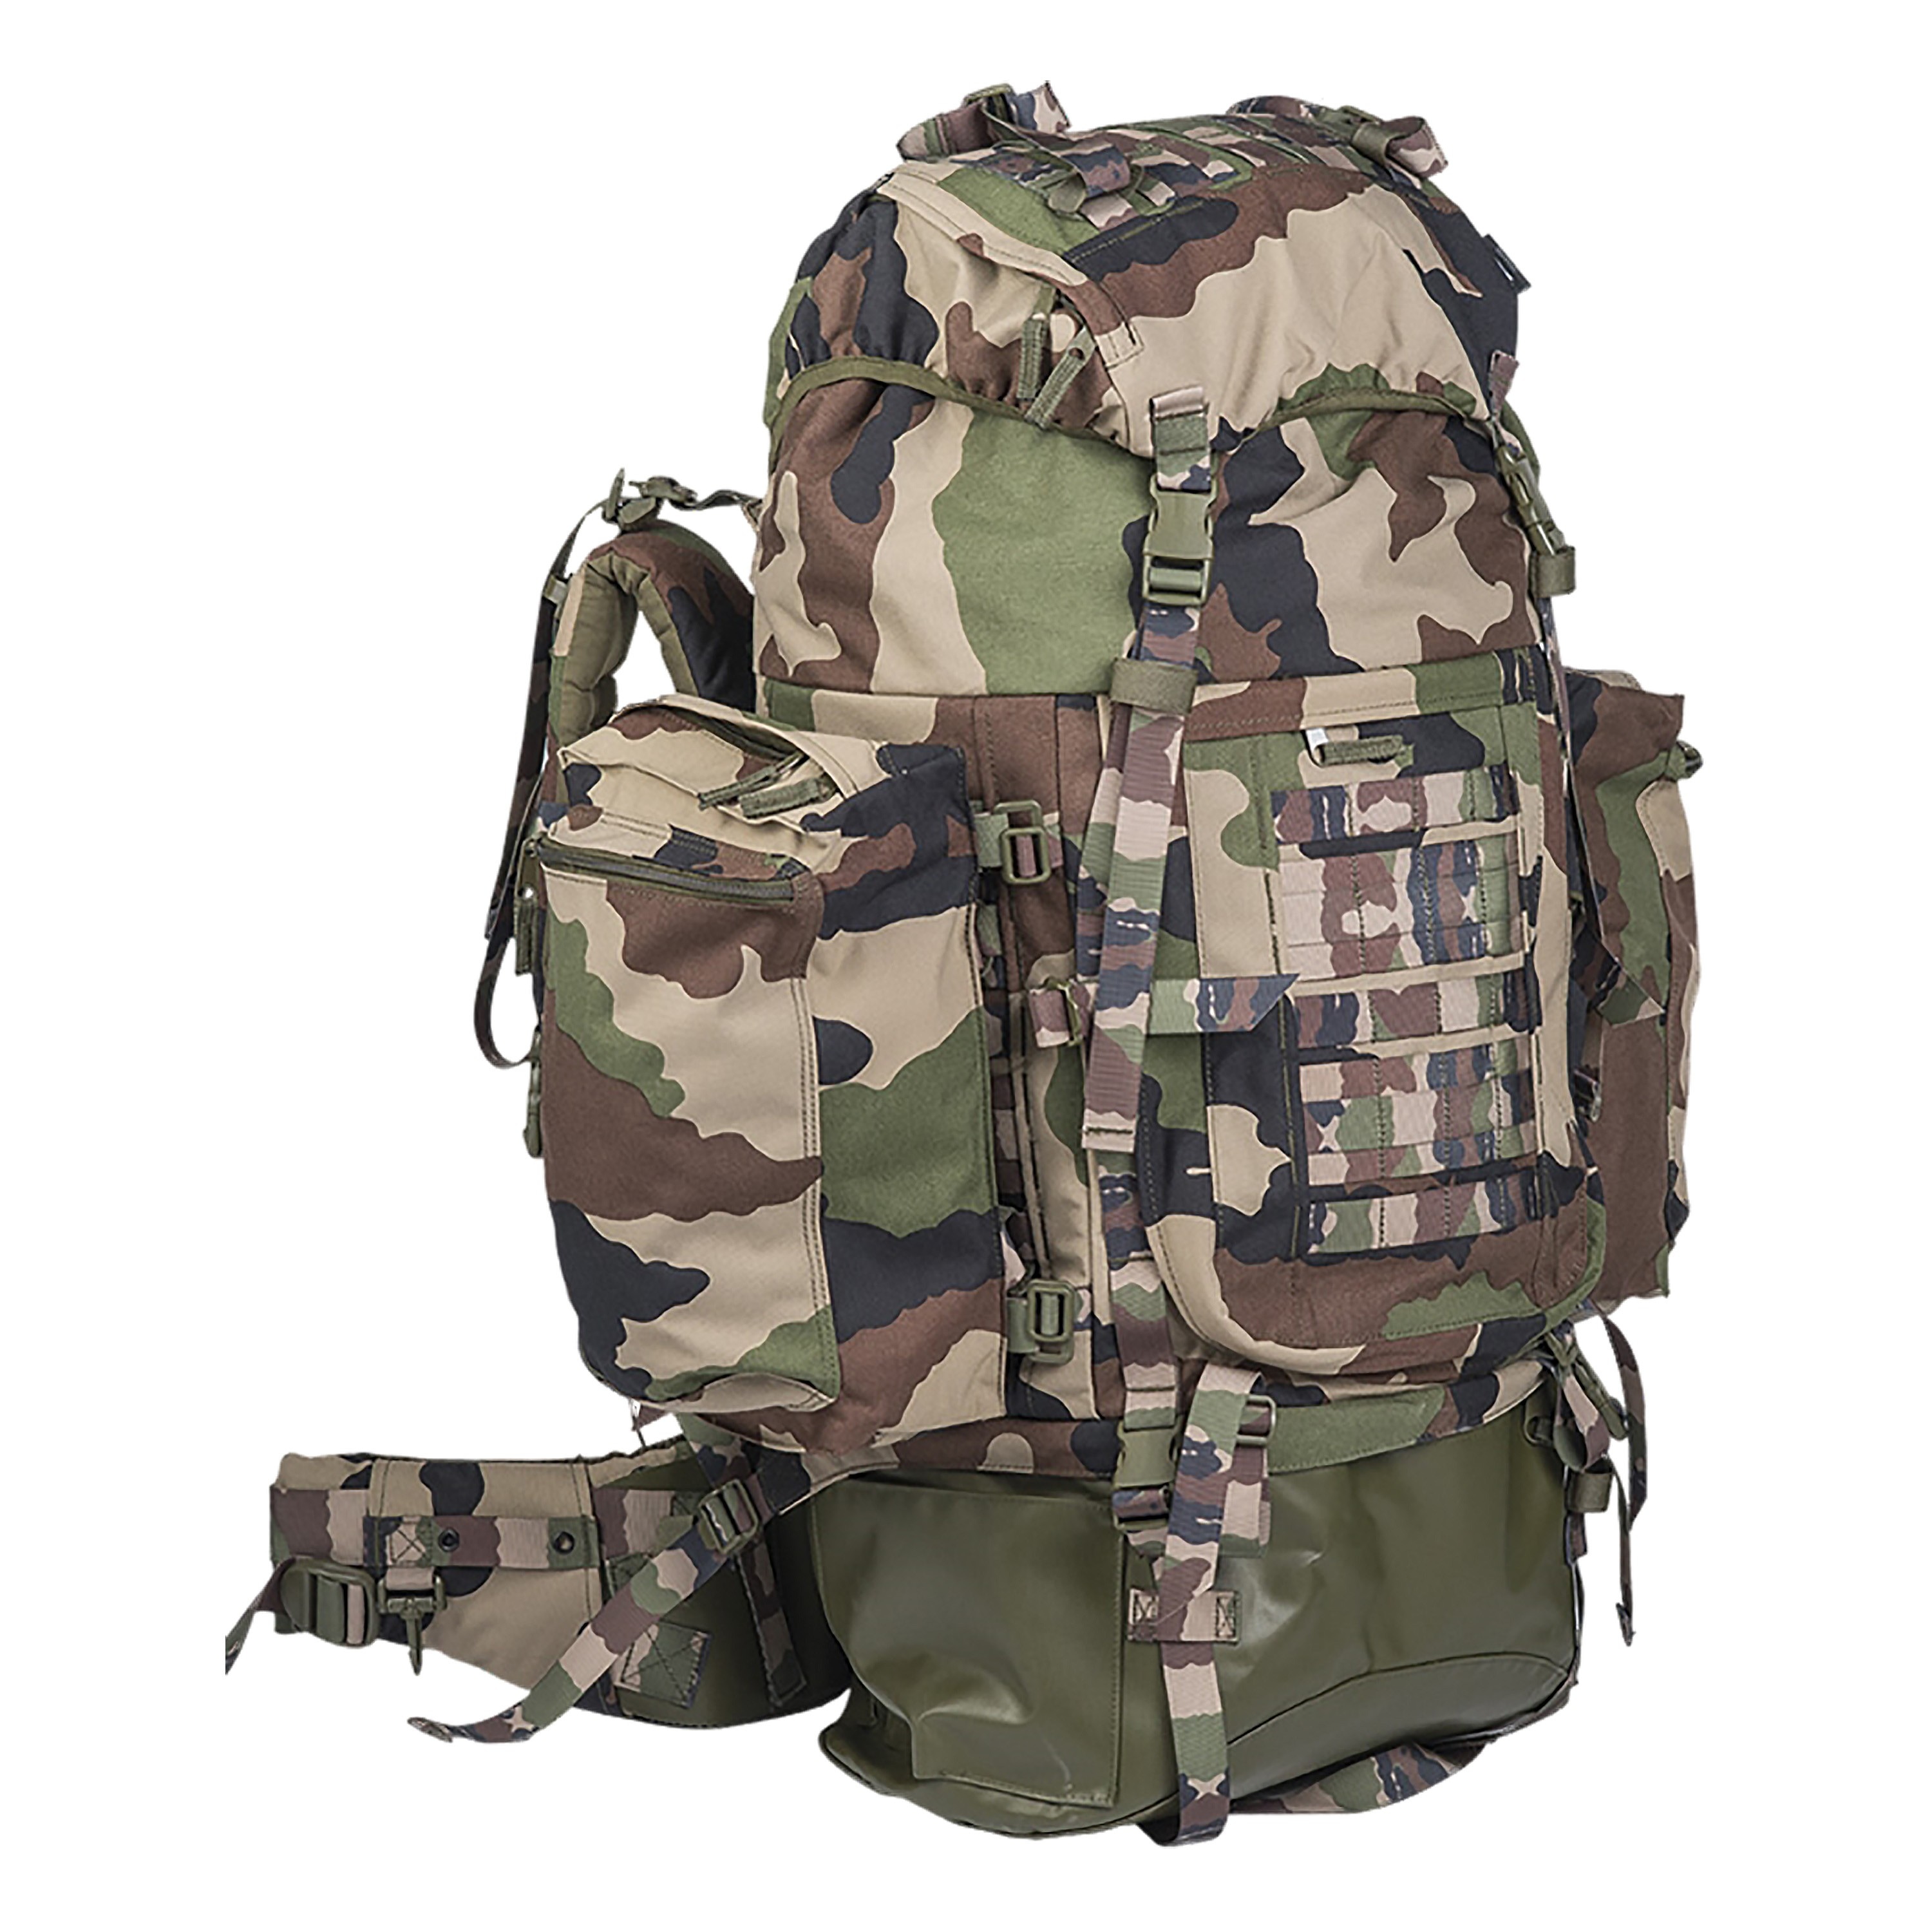 Purchase the Backpack Teesar 100 L CCE camo by ASMC